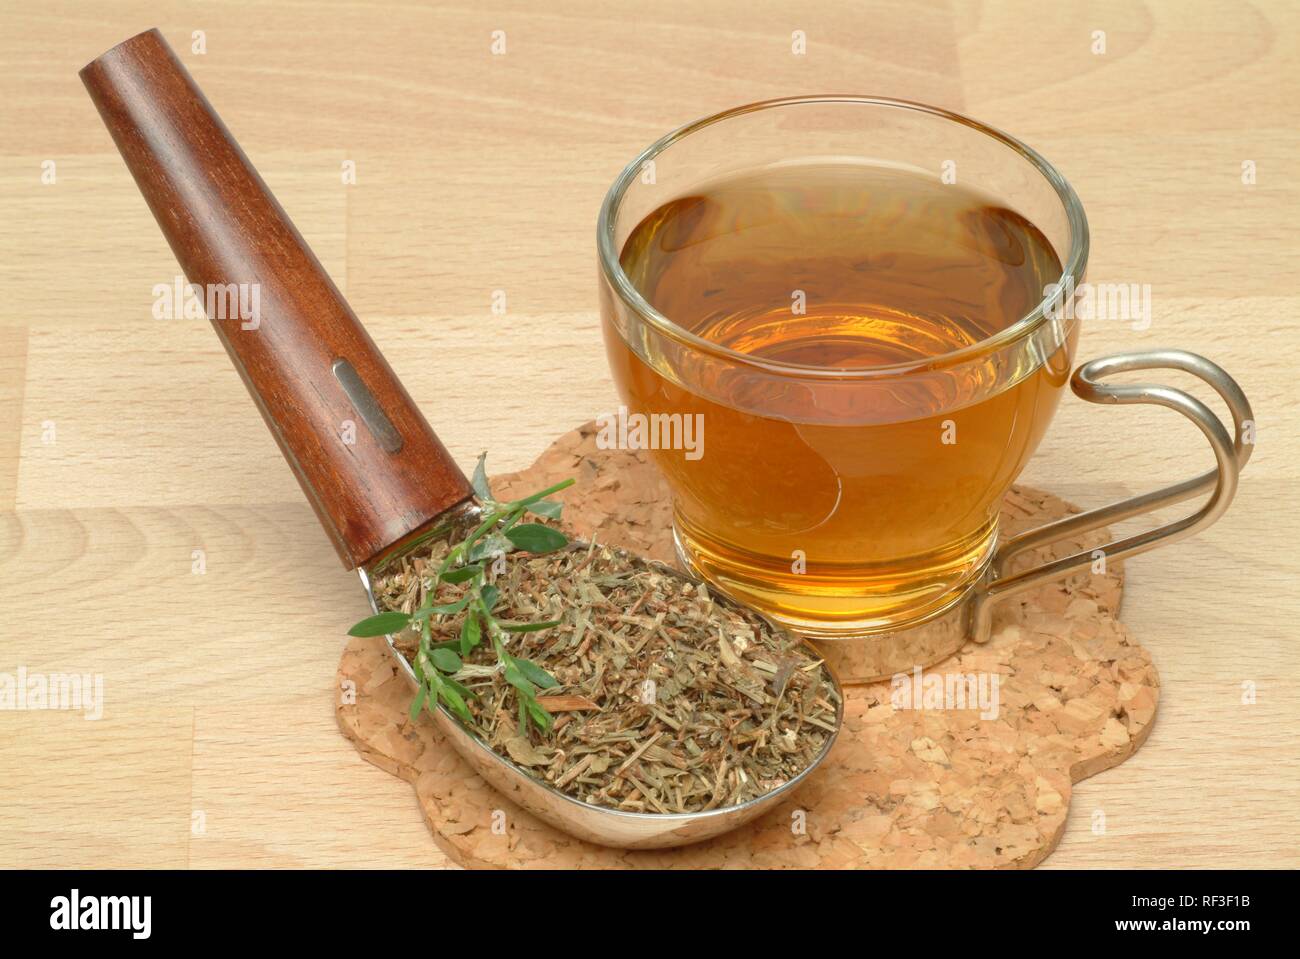 Common Knotgrass, Birdweed or Lowgrass (Polygonum aviculare), medicinal plant, herbal tea Stock Photo